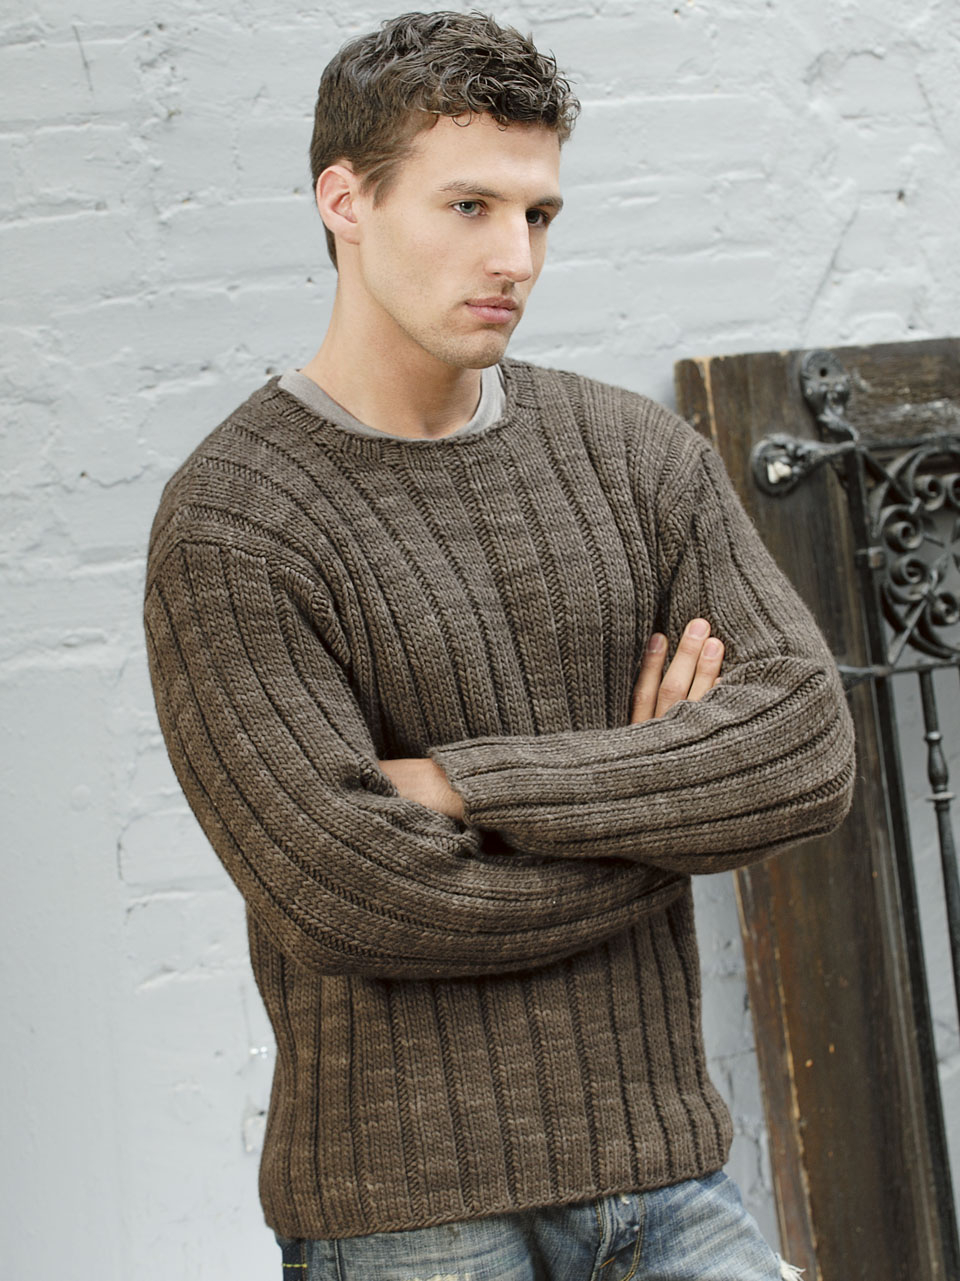 Free Knitting Patterns For Men's Sweaters 14 Best Photos Of Free Sweater Patterns For Men Men Knit Sweater